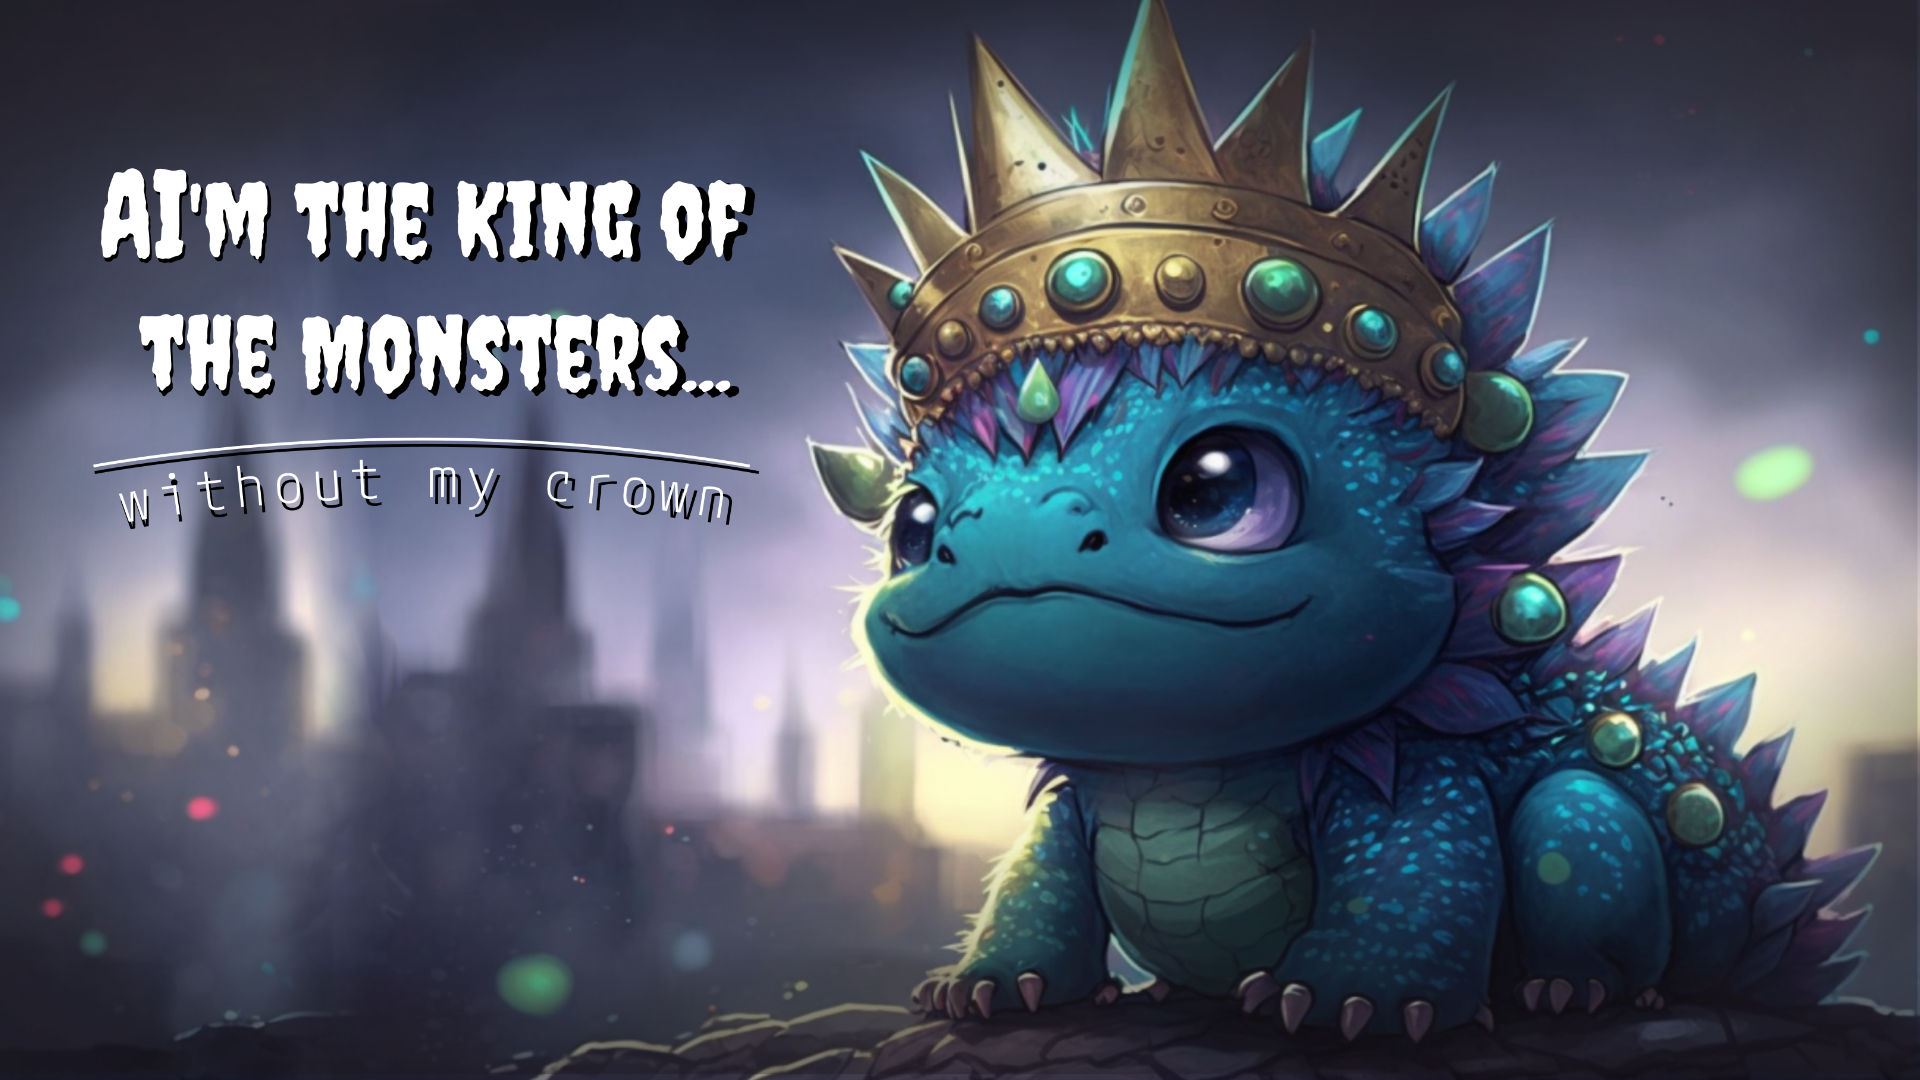 AI'm the King of Monsters... without my crown